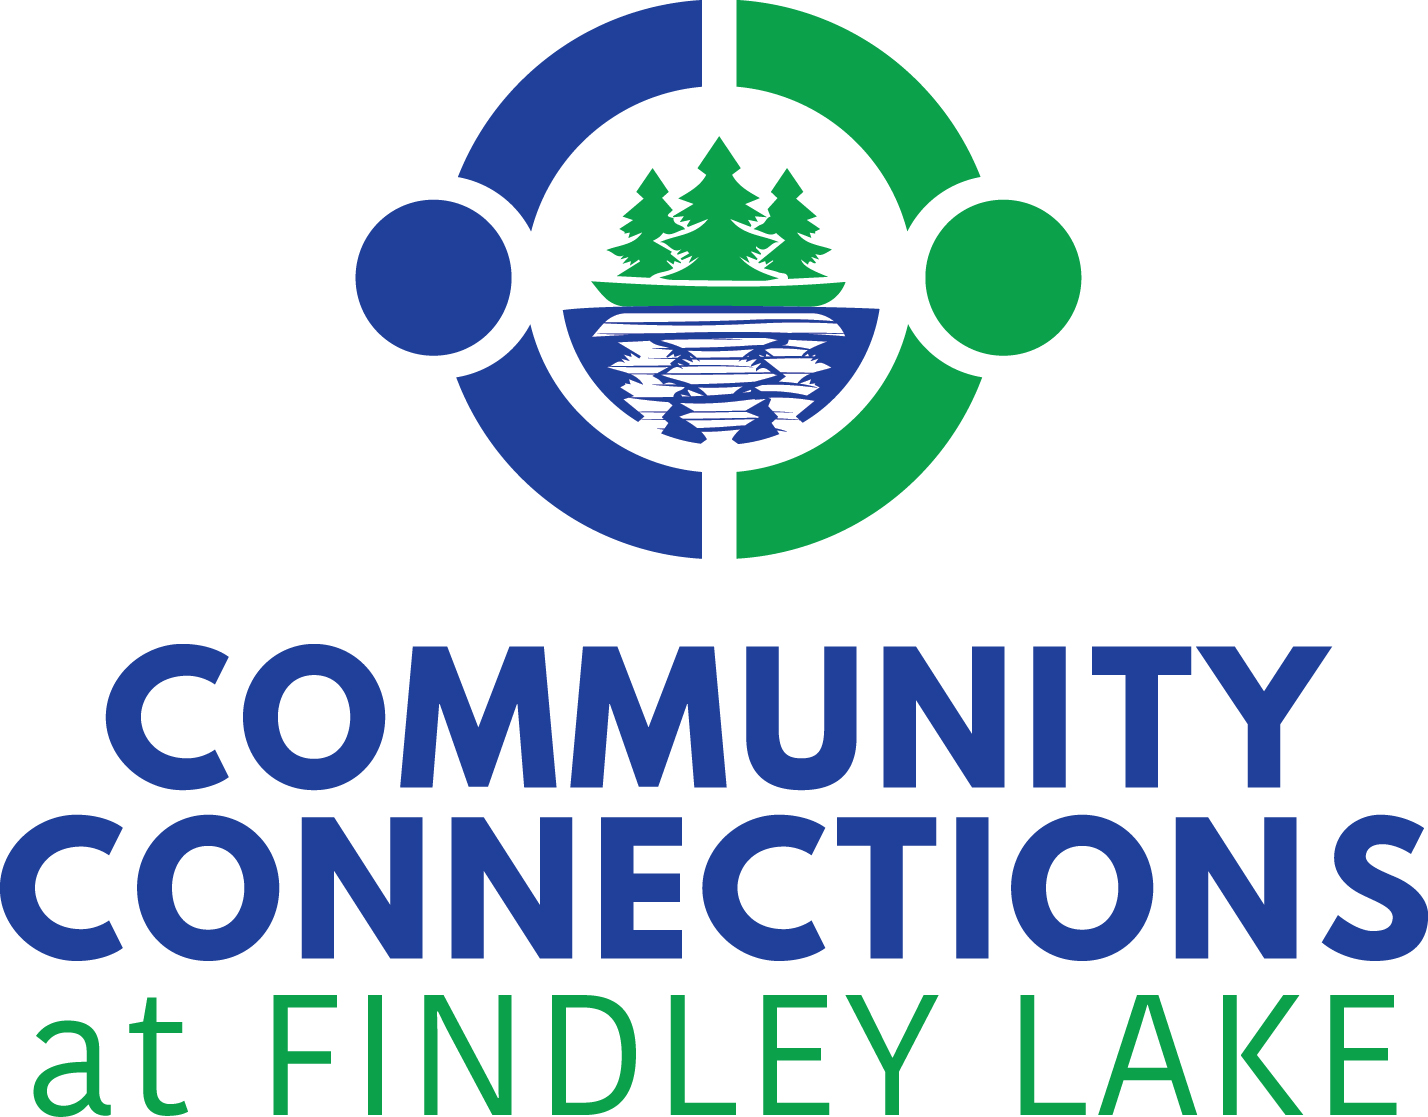 Community Connections at Findley Lake logo